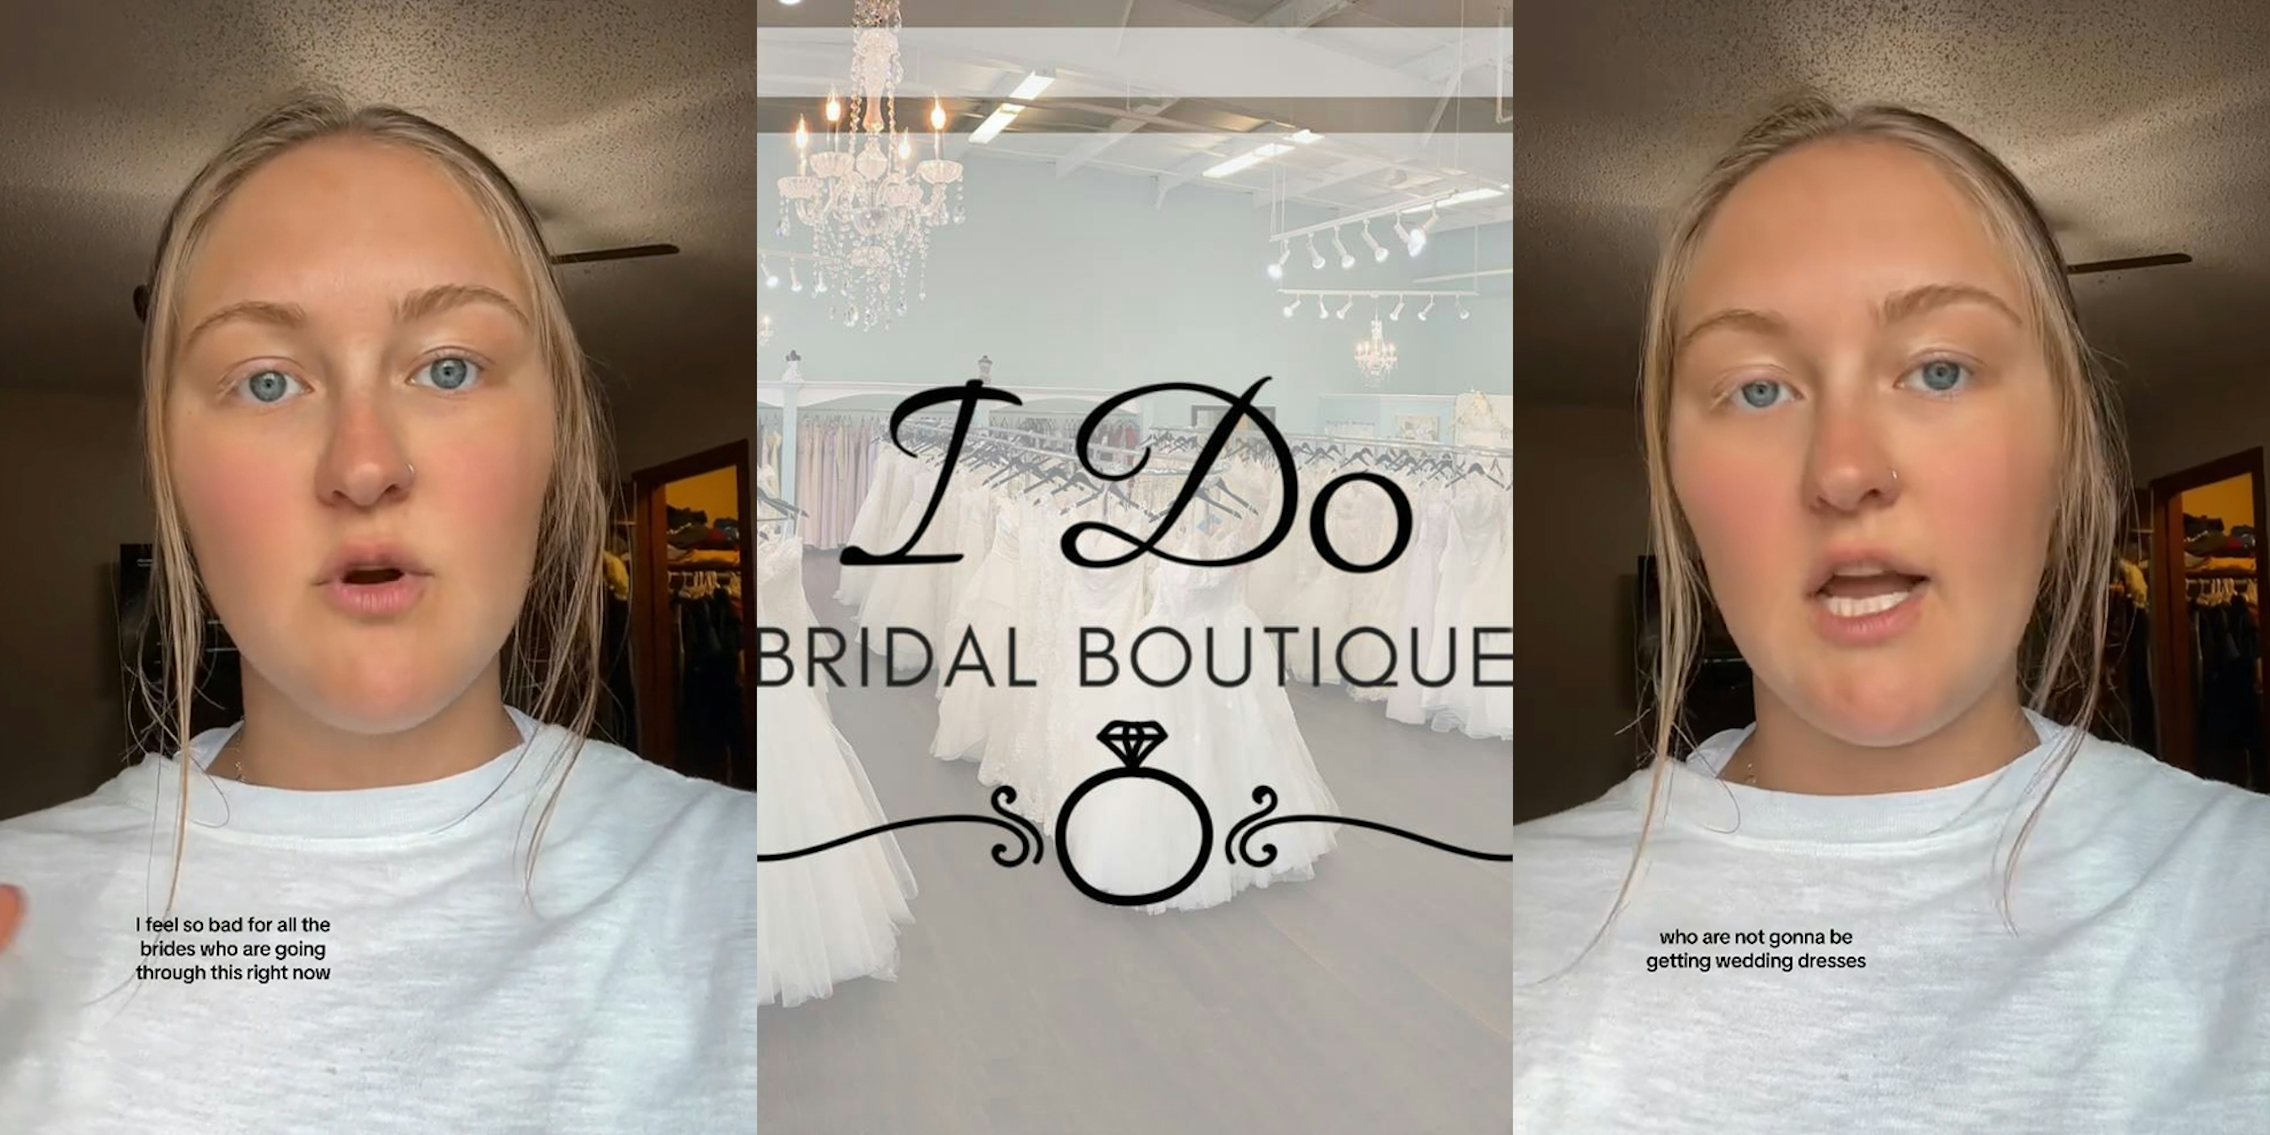 I Do Bridal Boutique customer speaking with caption 'I feel so bad for the brides who are going through this right now' (l) I Do Bridal Boutique logo in front of dressing hung in store (c) I Do Bridal Boutique customer speaking with caption 'who are not gonna be getting wedding dresses' (r)